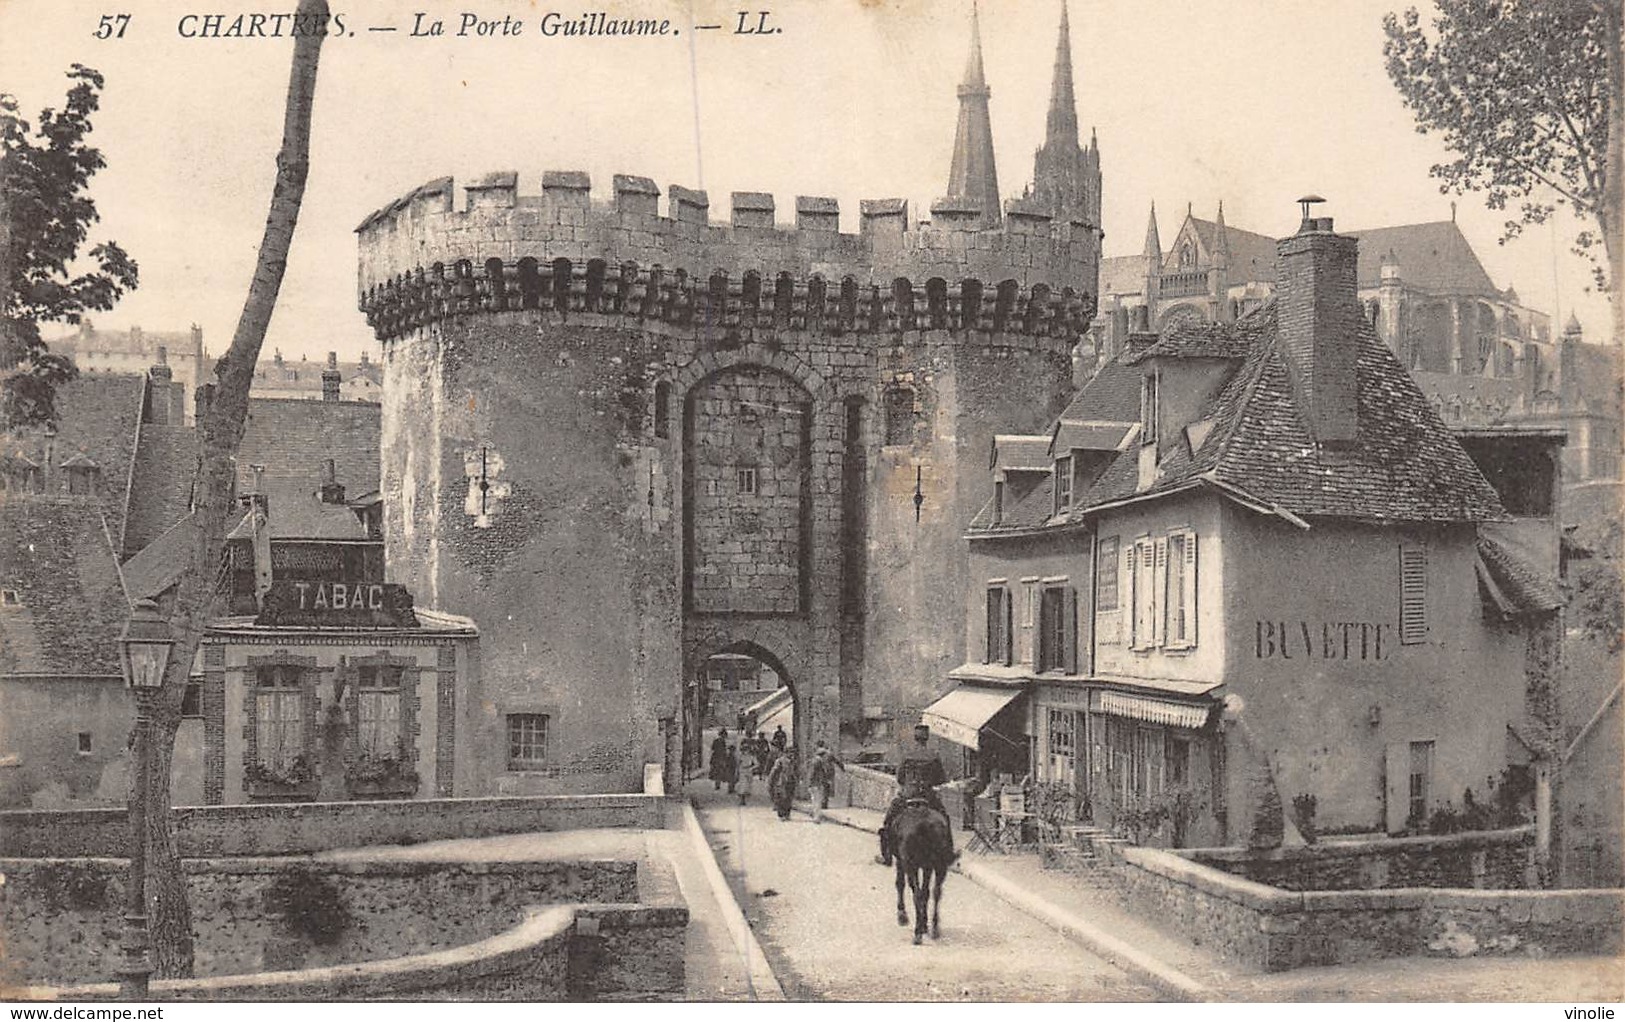 20-4754 : CHARTRES. PORTE GUILLAUME. EDITION LL - Chartres